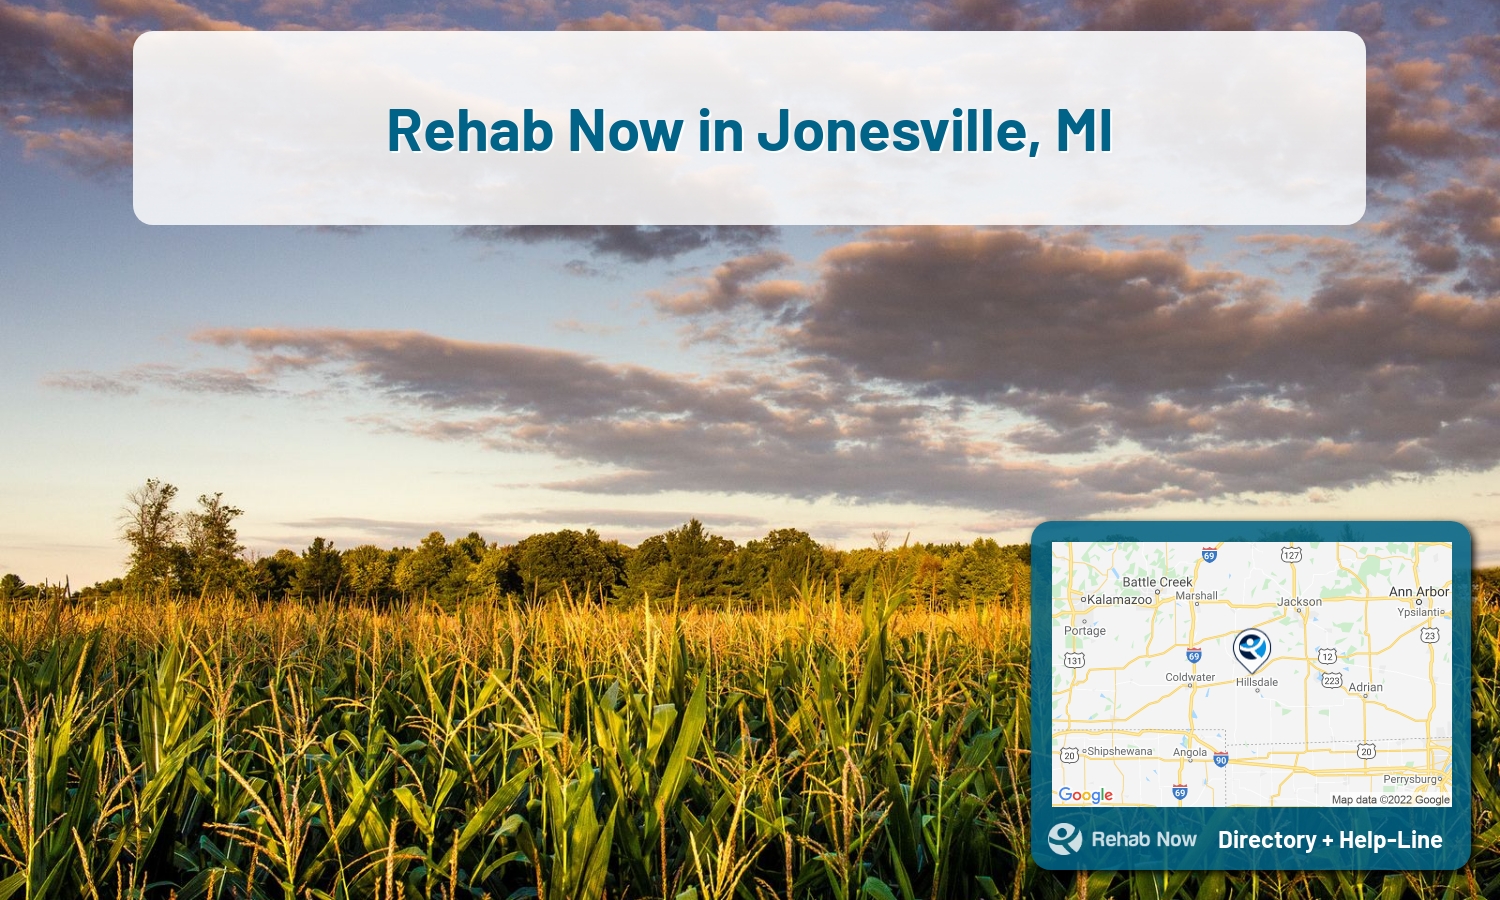 Jonesville, MI Treatment Centers. Find drug rehab in Jonesville, Michigan, or detox and treatment programs. Get the right help now!